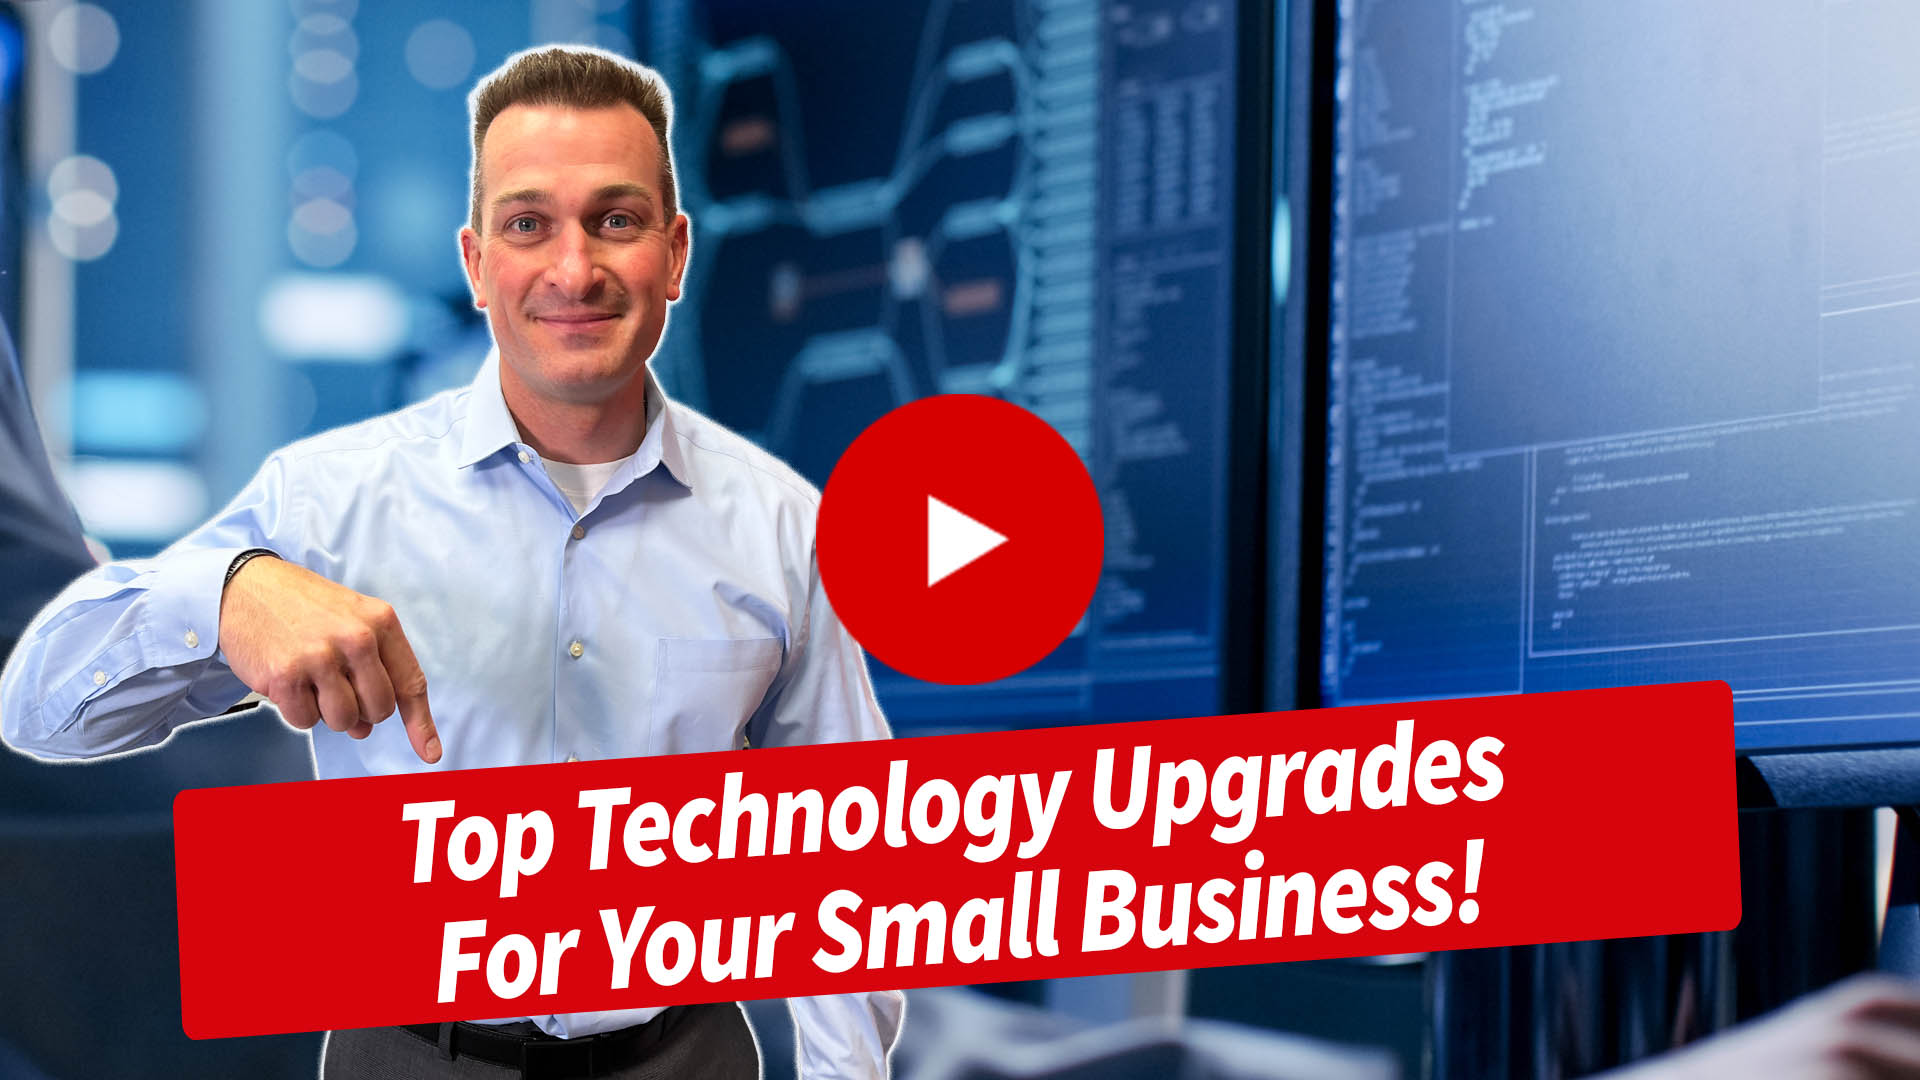 Top Technology Upgrades For Your Small Business!